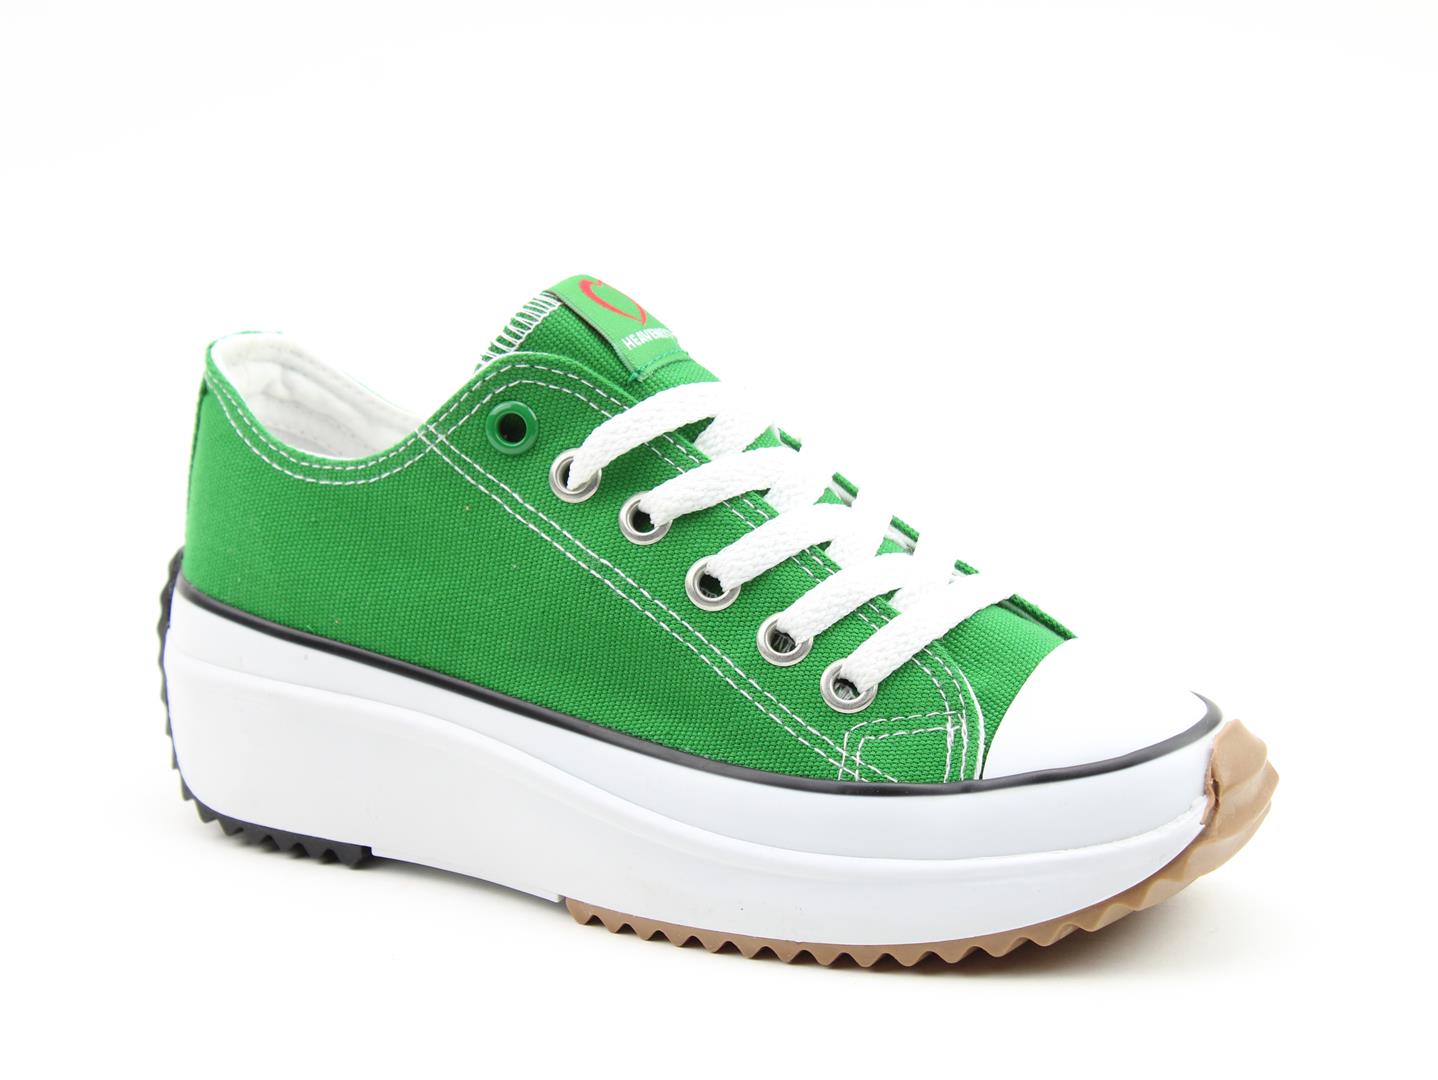 Heavenly Feet Strata Ladies Green Textile Vegan Lace Up Trainers